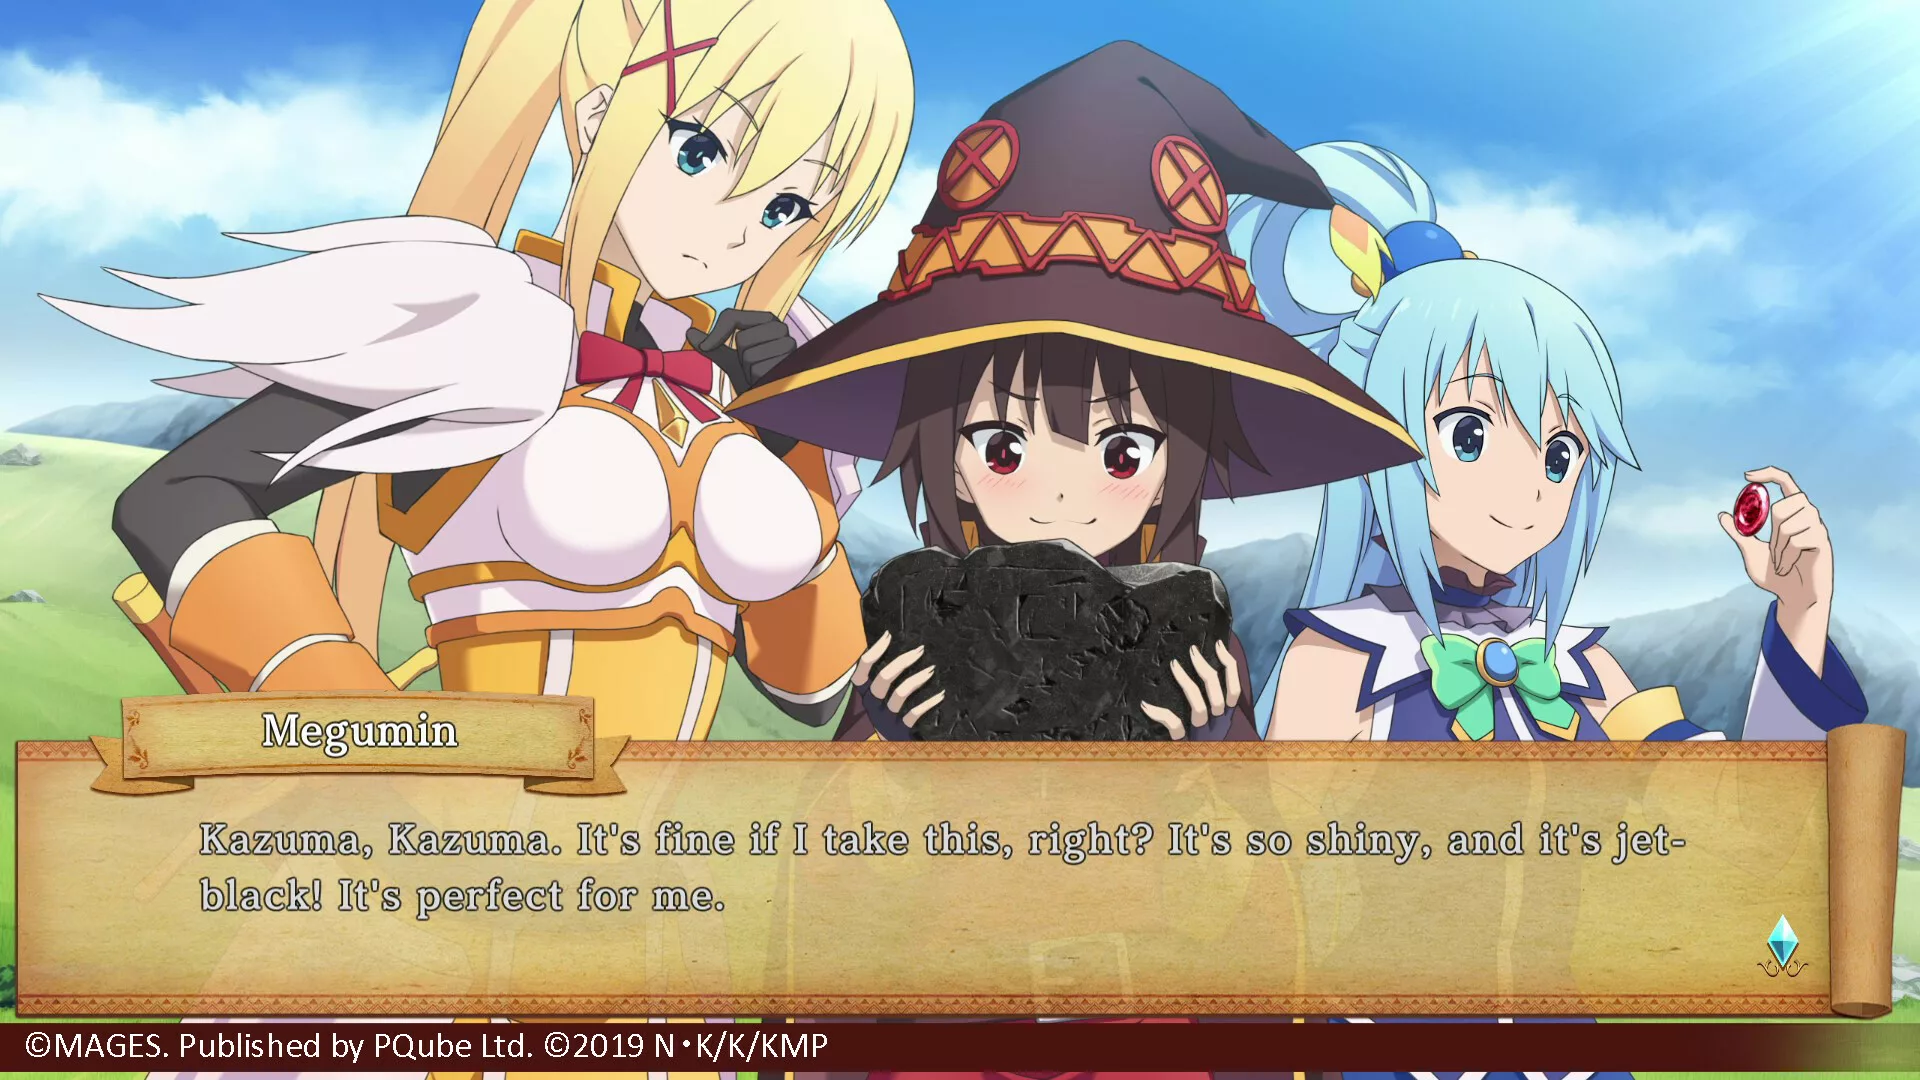 KONOSUBA - God's Blessing on this Wonderful World! Love For These Clothes Of Desire! Review